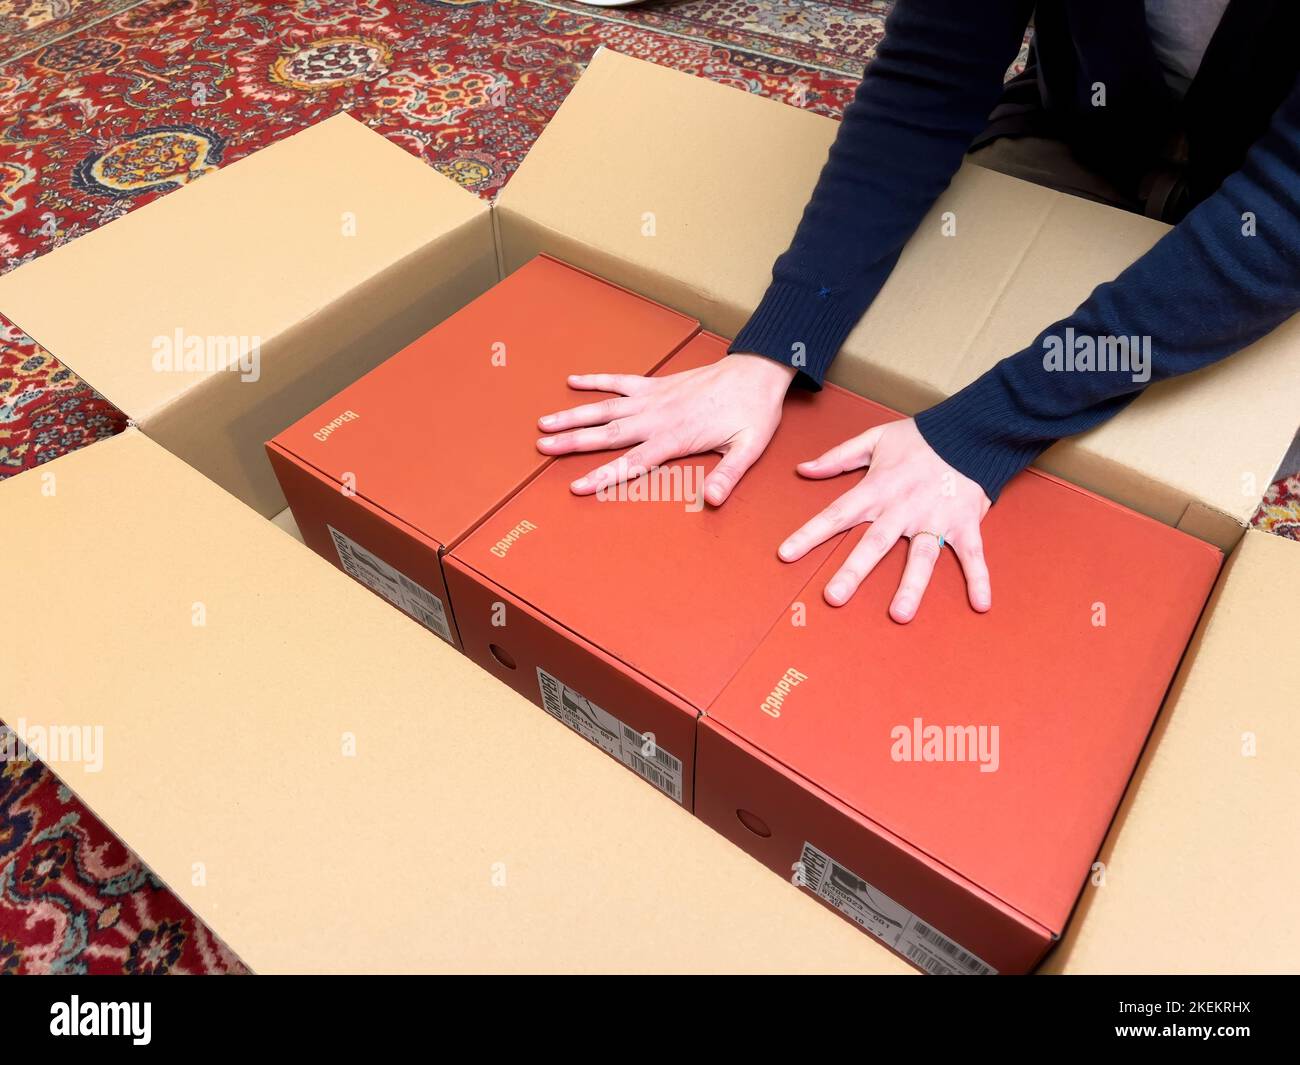 London, United Kingdom - Oct 21, 2022: Woman holding hands Unboxing unpacking cardboard e-commerce internet order with three red Camper shoes Stock Photo